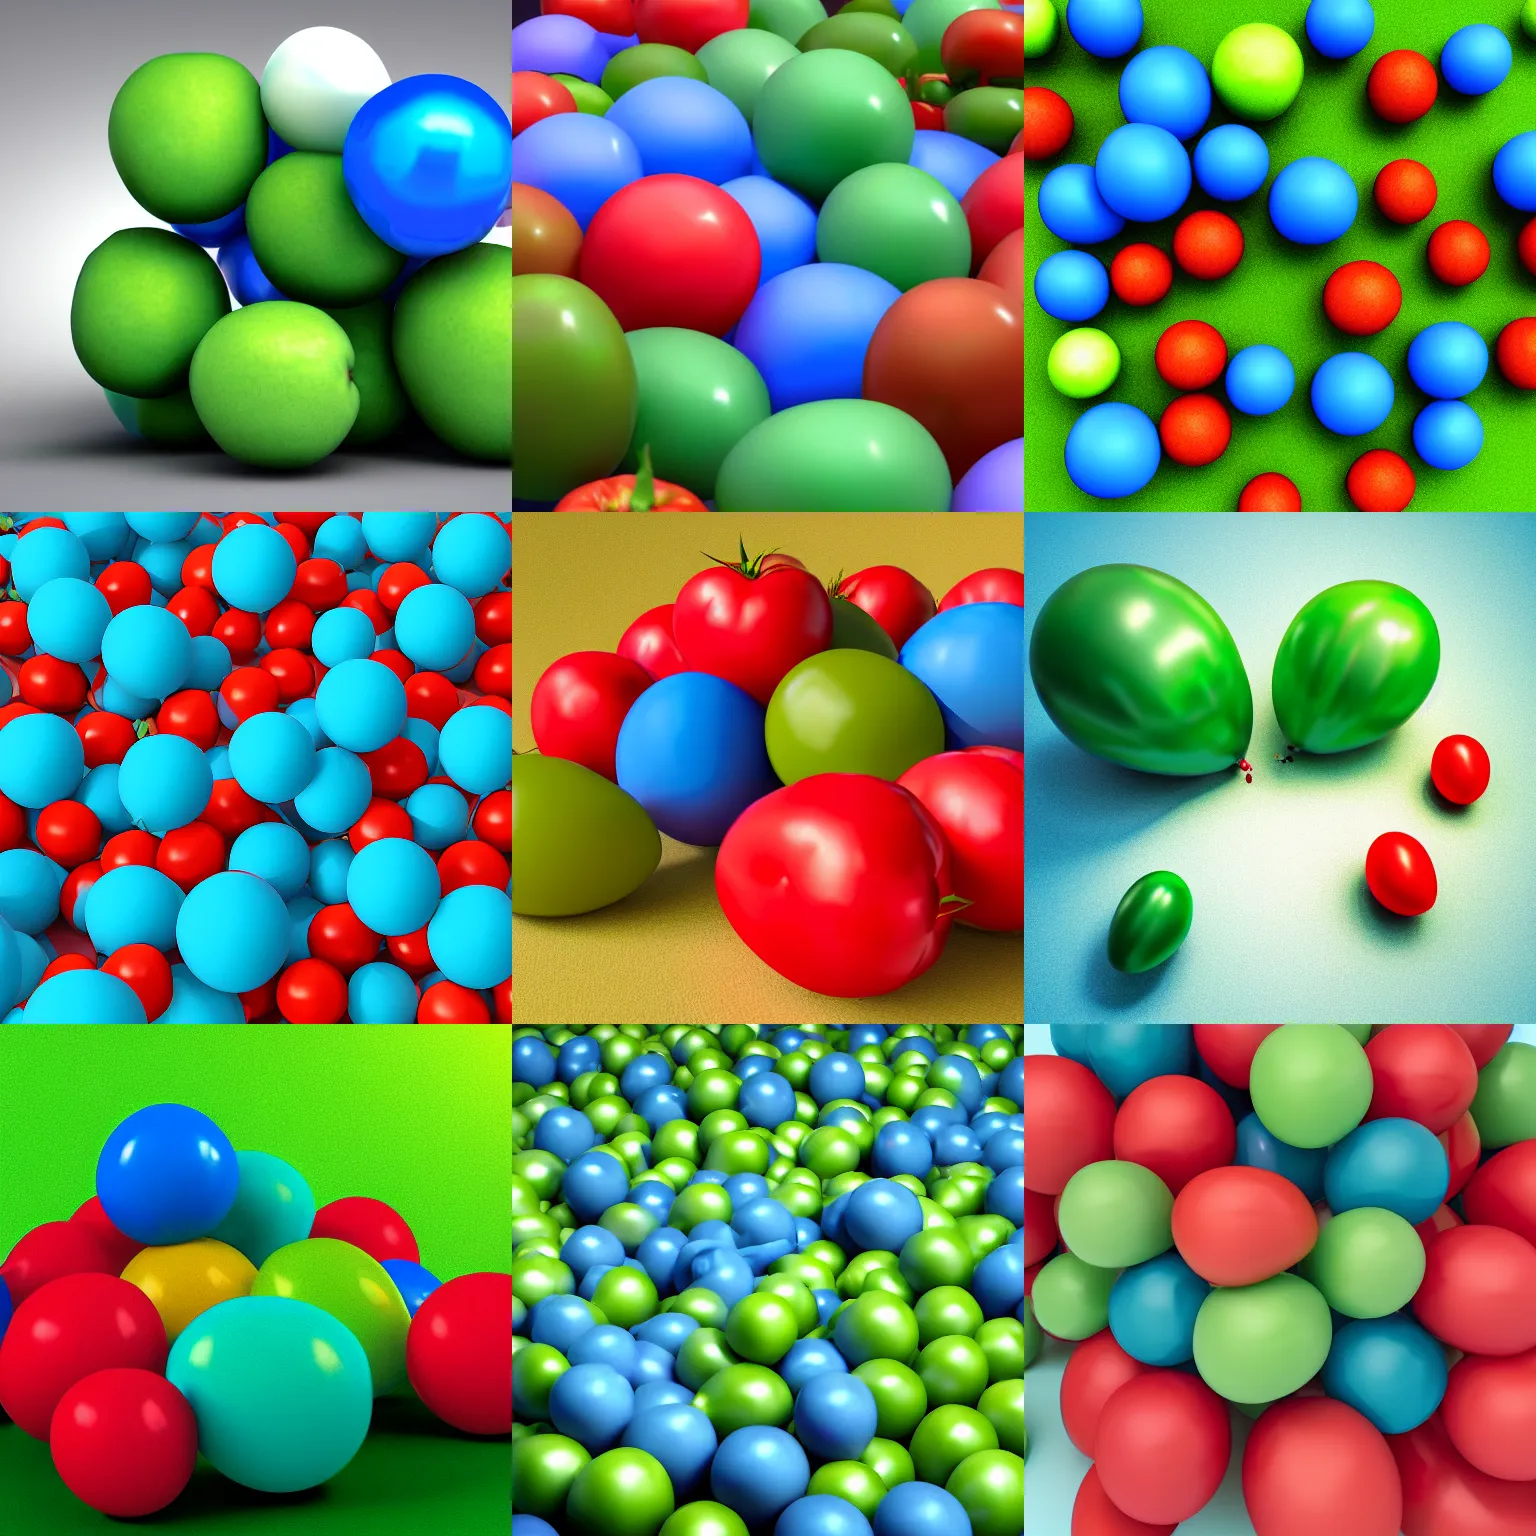 Prompt: 3D raytrace render of a pile of tomatoes and blue ballons in a green room